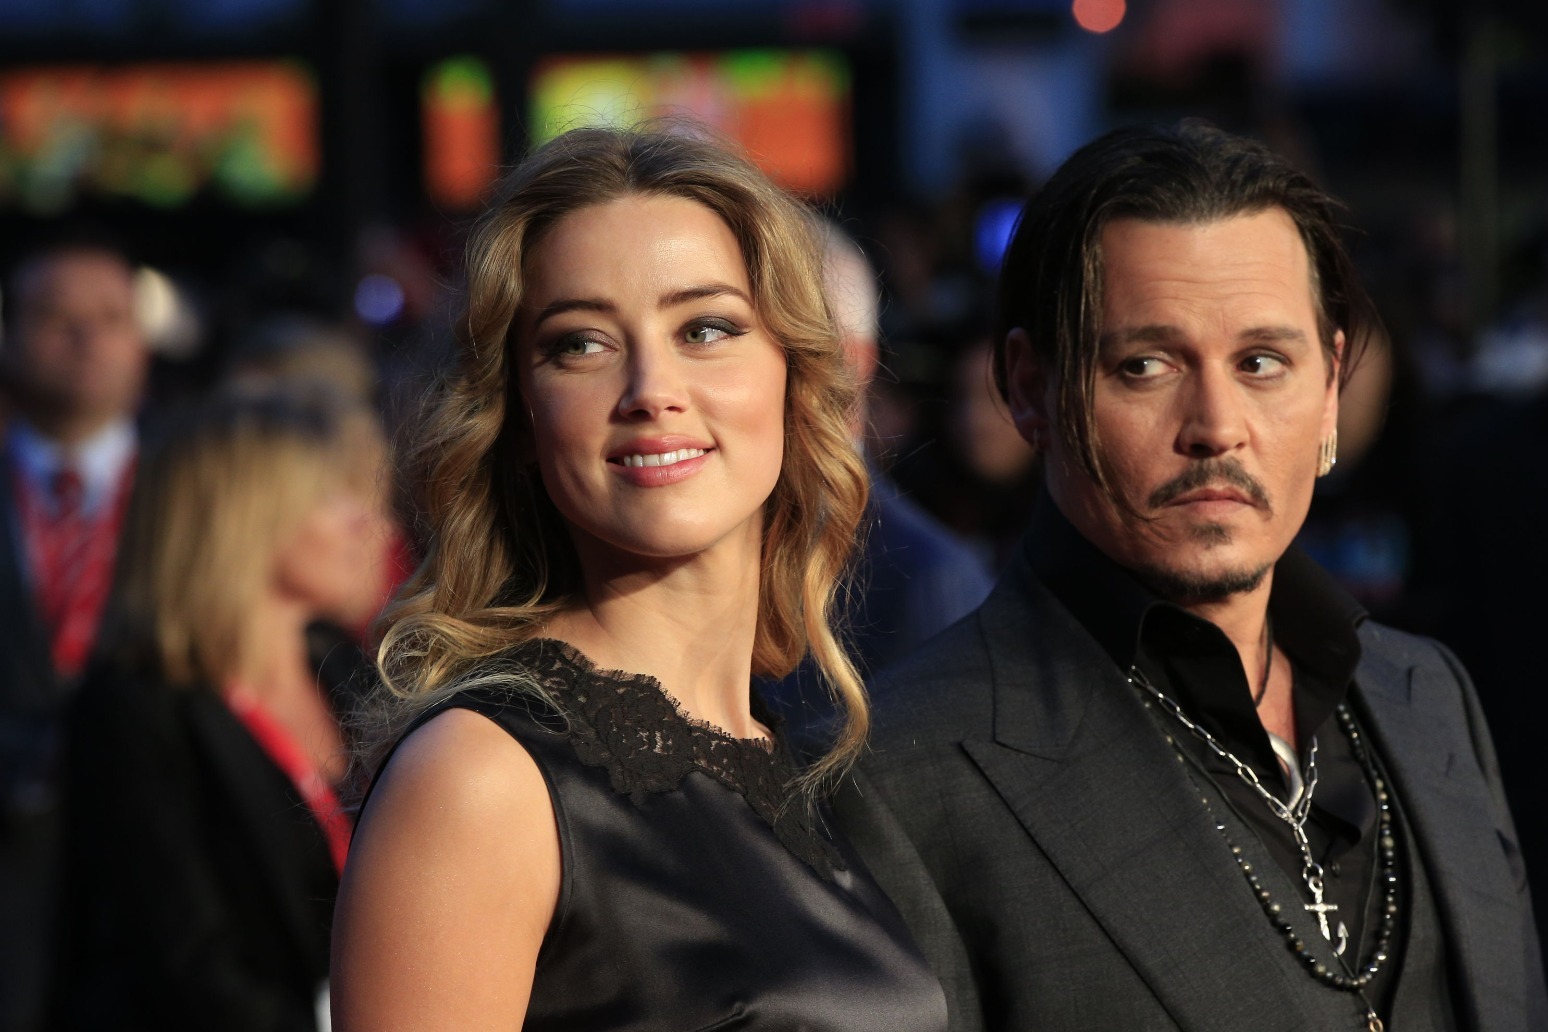 Amber Heard’s lawyer says actress will ‘absolutely’ appeal defamation decision 